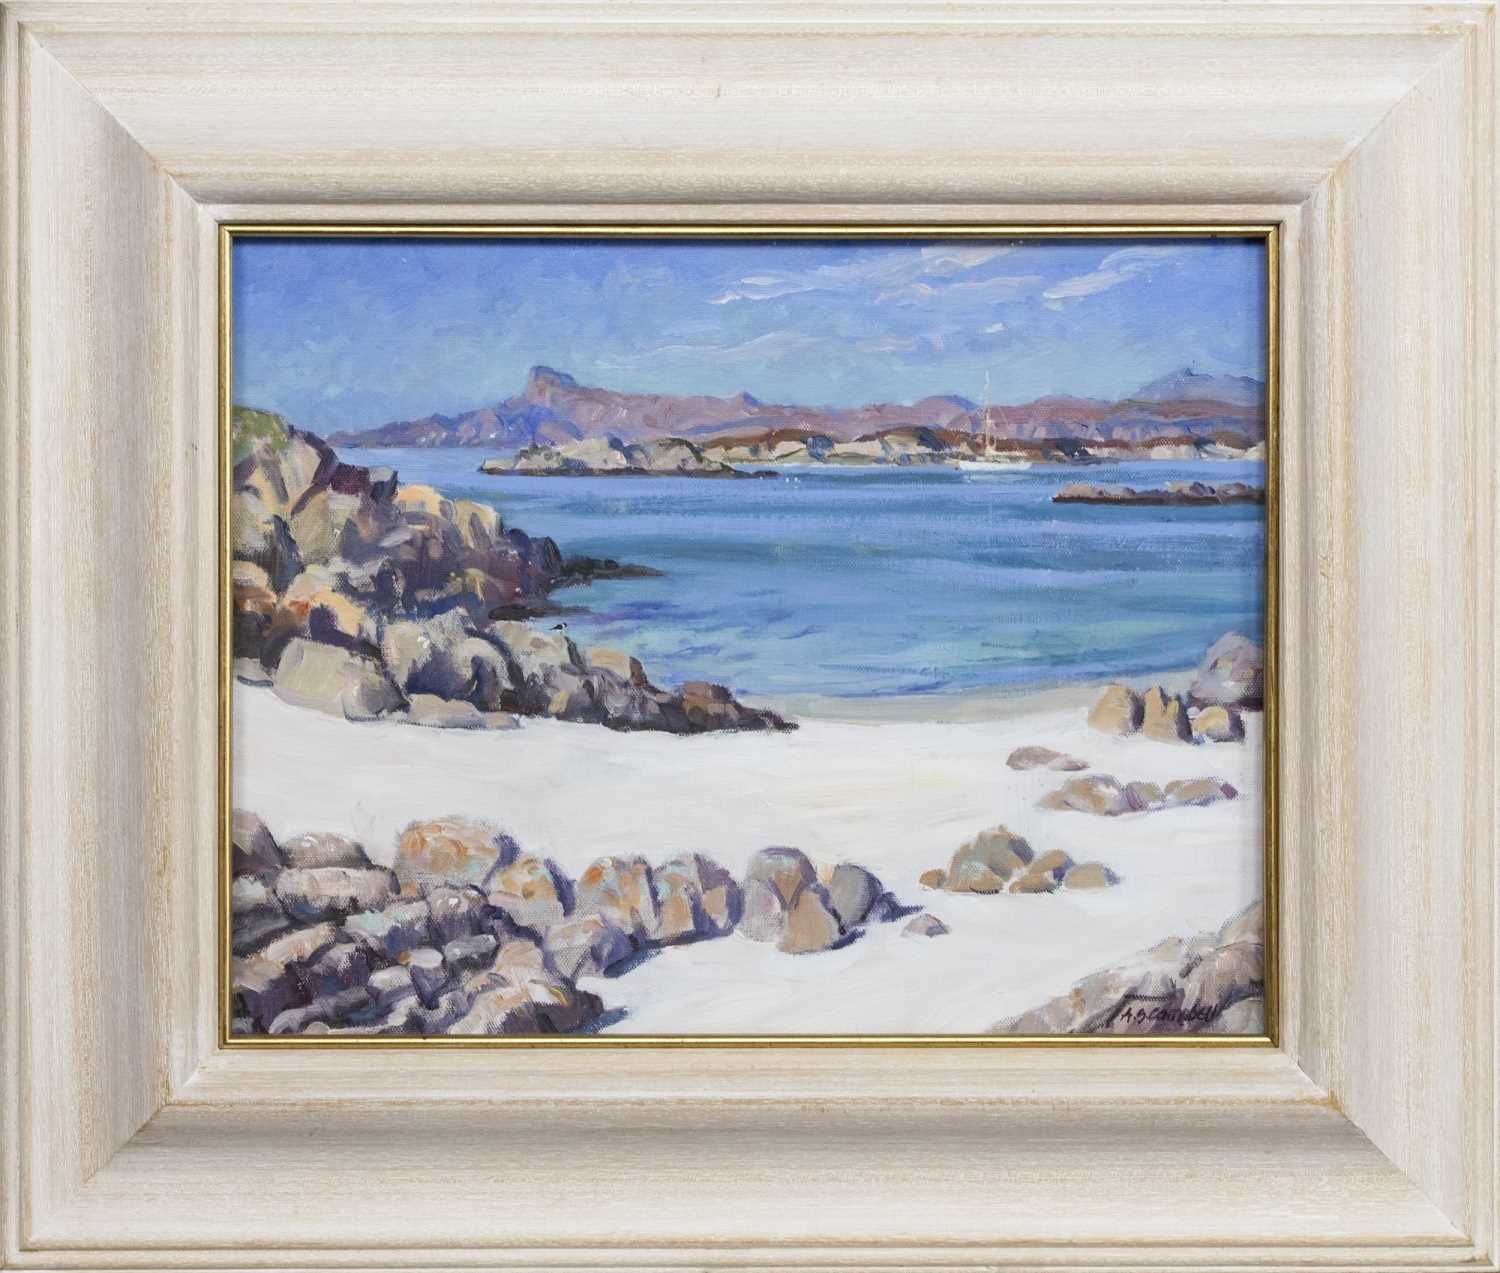 TOWARDS EIGG: SOUNDS OF ARISAIG, AN OIL BY ANTHONY CAMPBELL